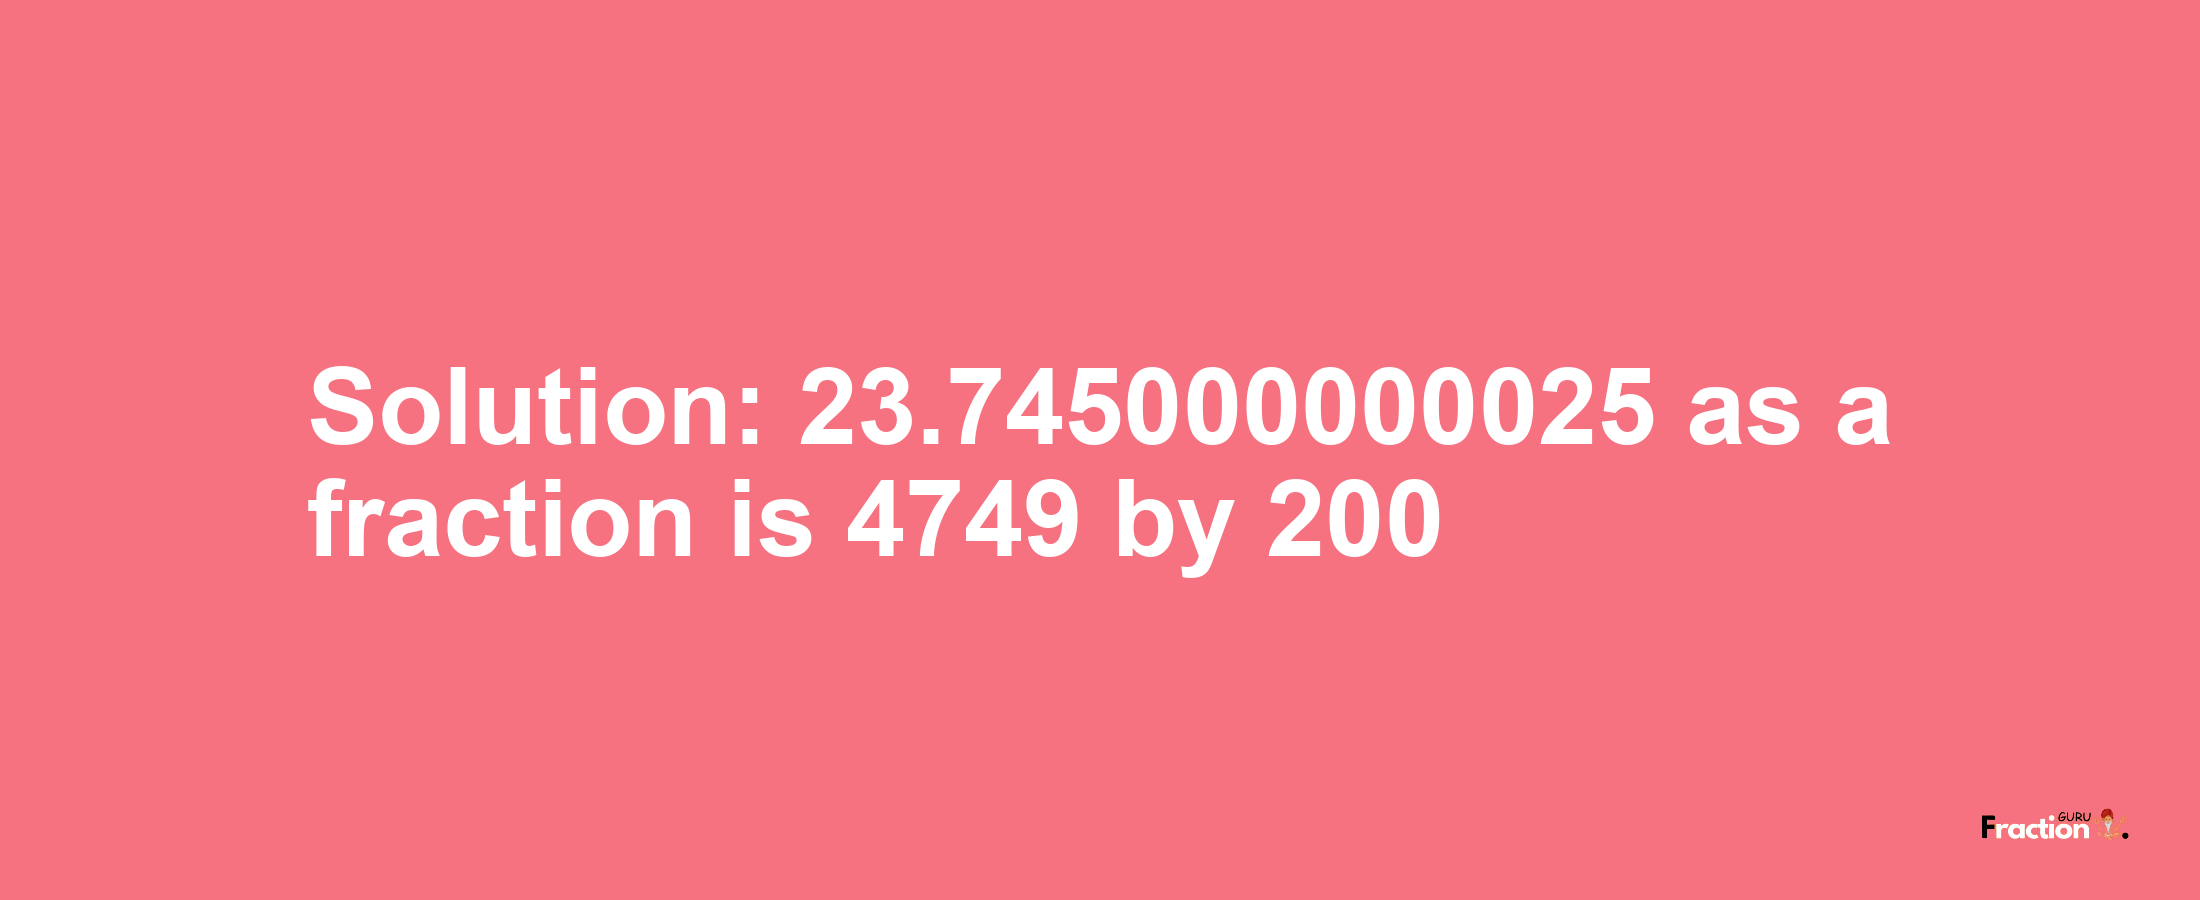 Solution:23.745000000025 as a fraction is 4749/200